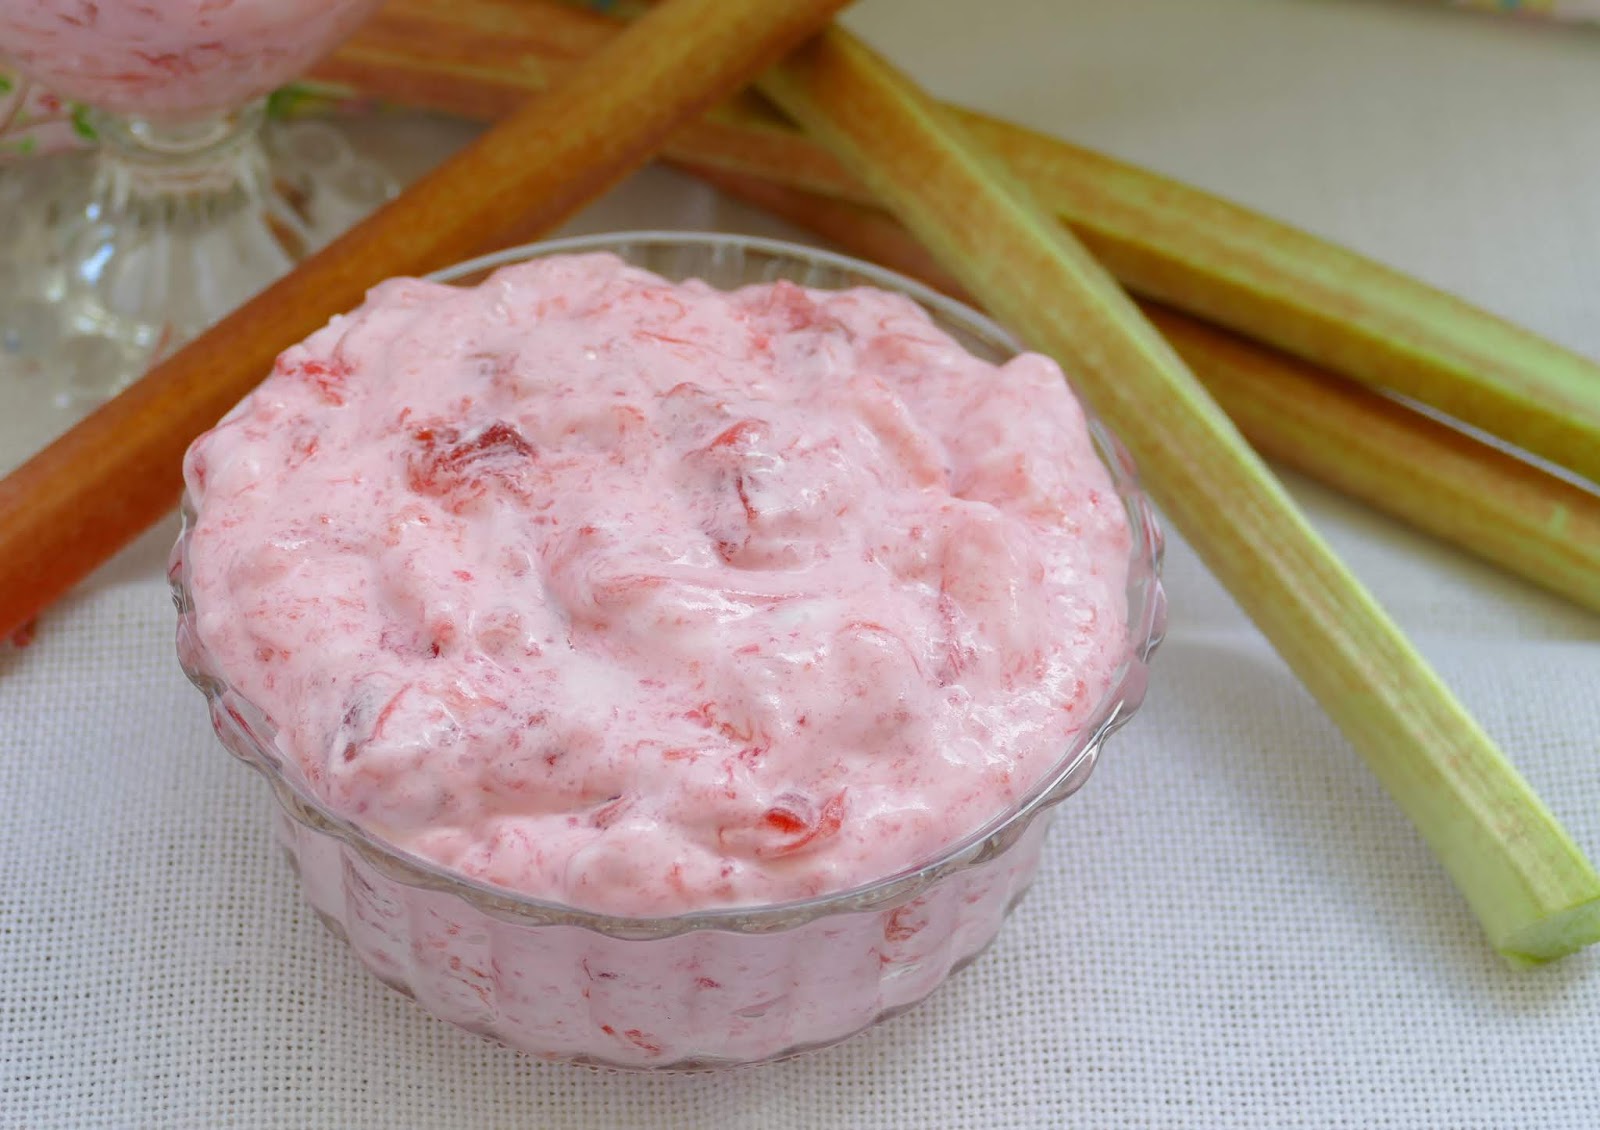 Looking for an easy and tasty spring or summer dessert? This wonderful Rhubarb Fluff Dessert Salad uses fresh or frozen rhubarb, any flavor red jello and a few other simple ingredients! It's such a crowd pleaser and perfect for any occasion!